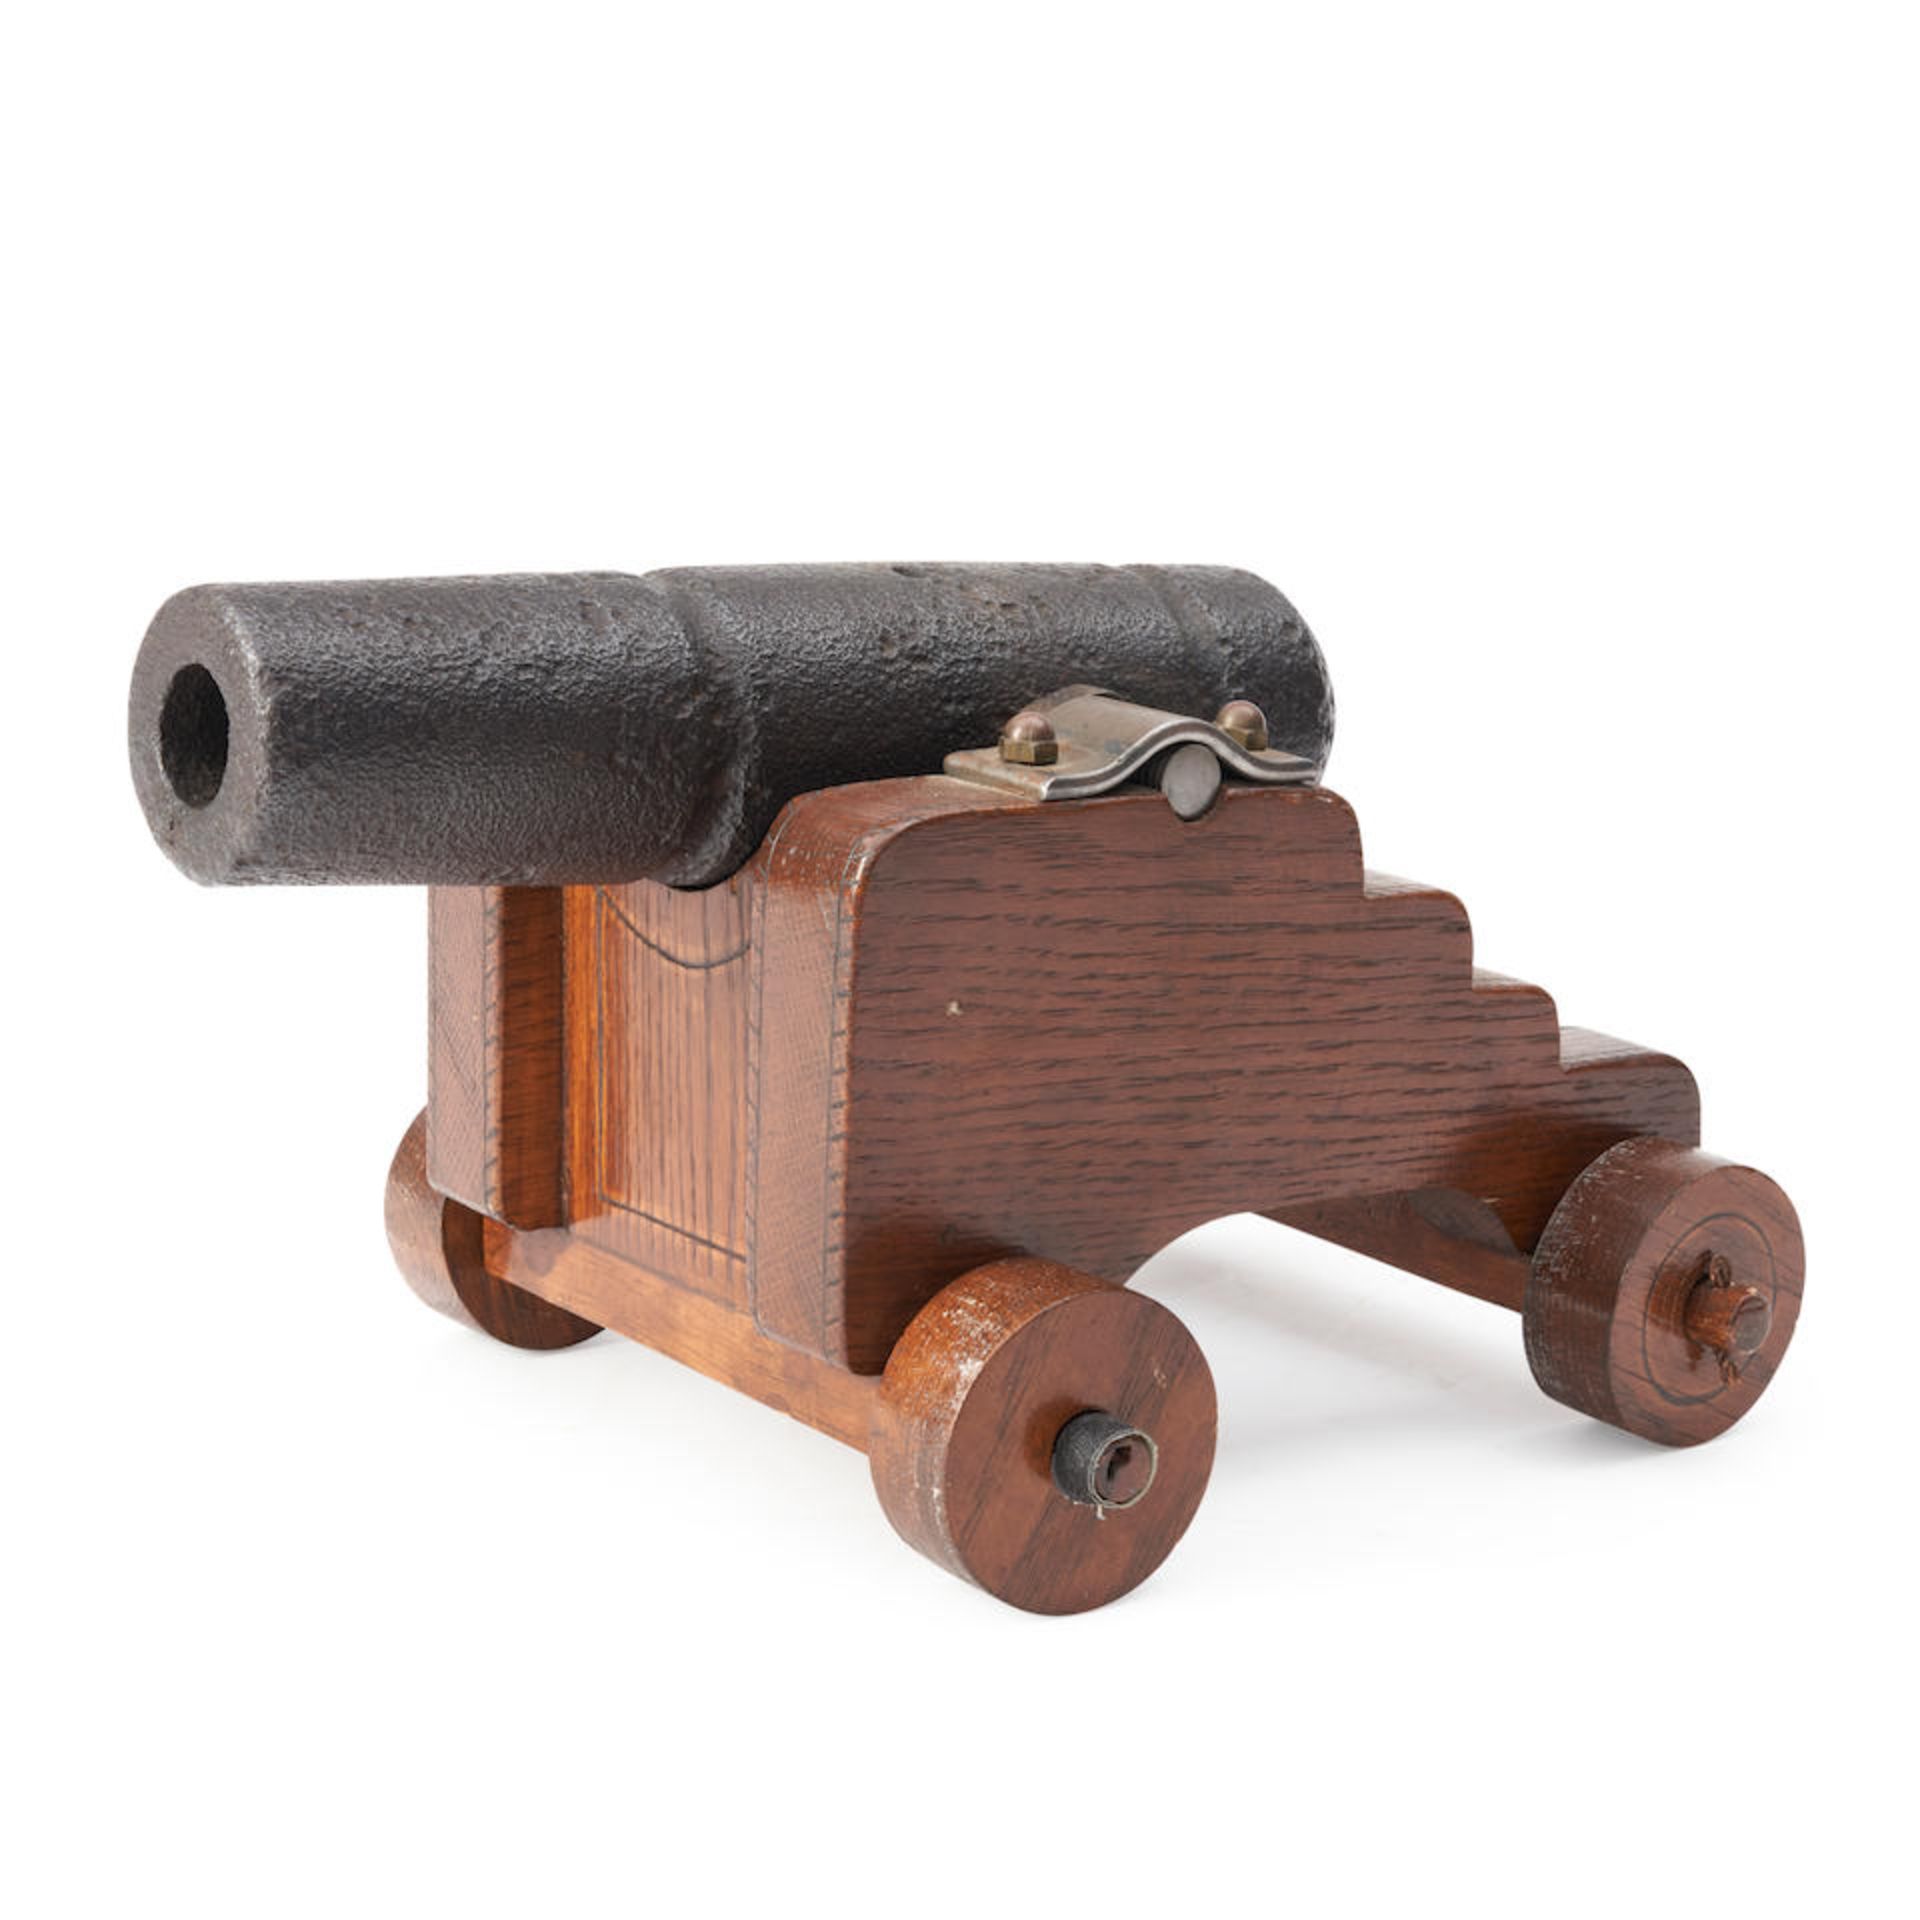 Miniature Cast Iron Naval Cannon and Carriage.